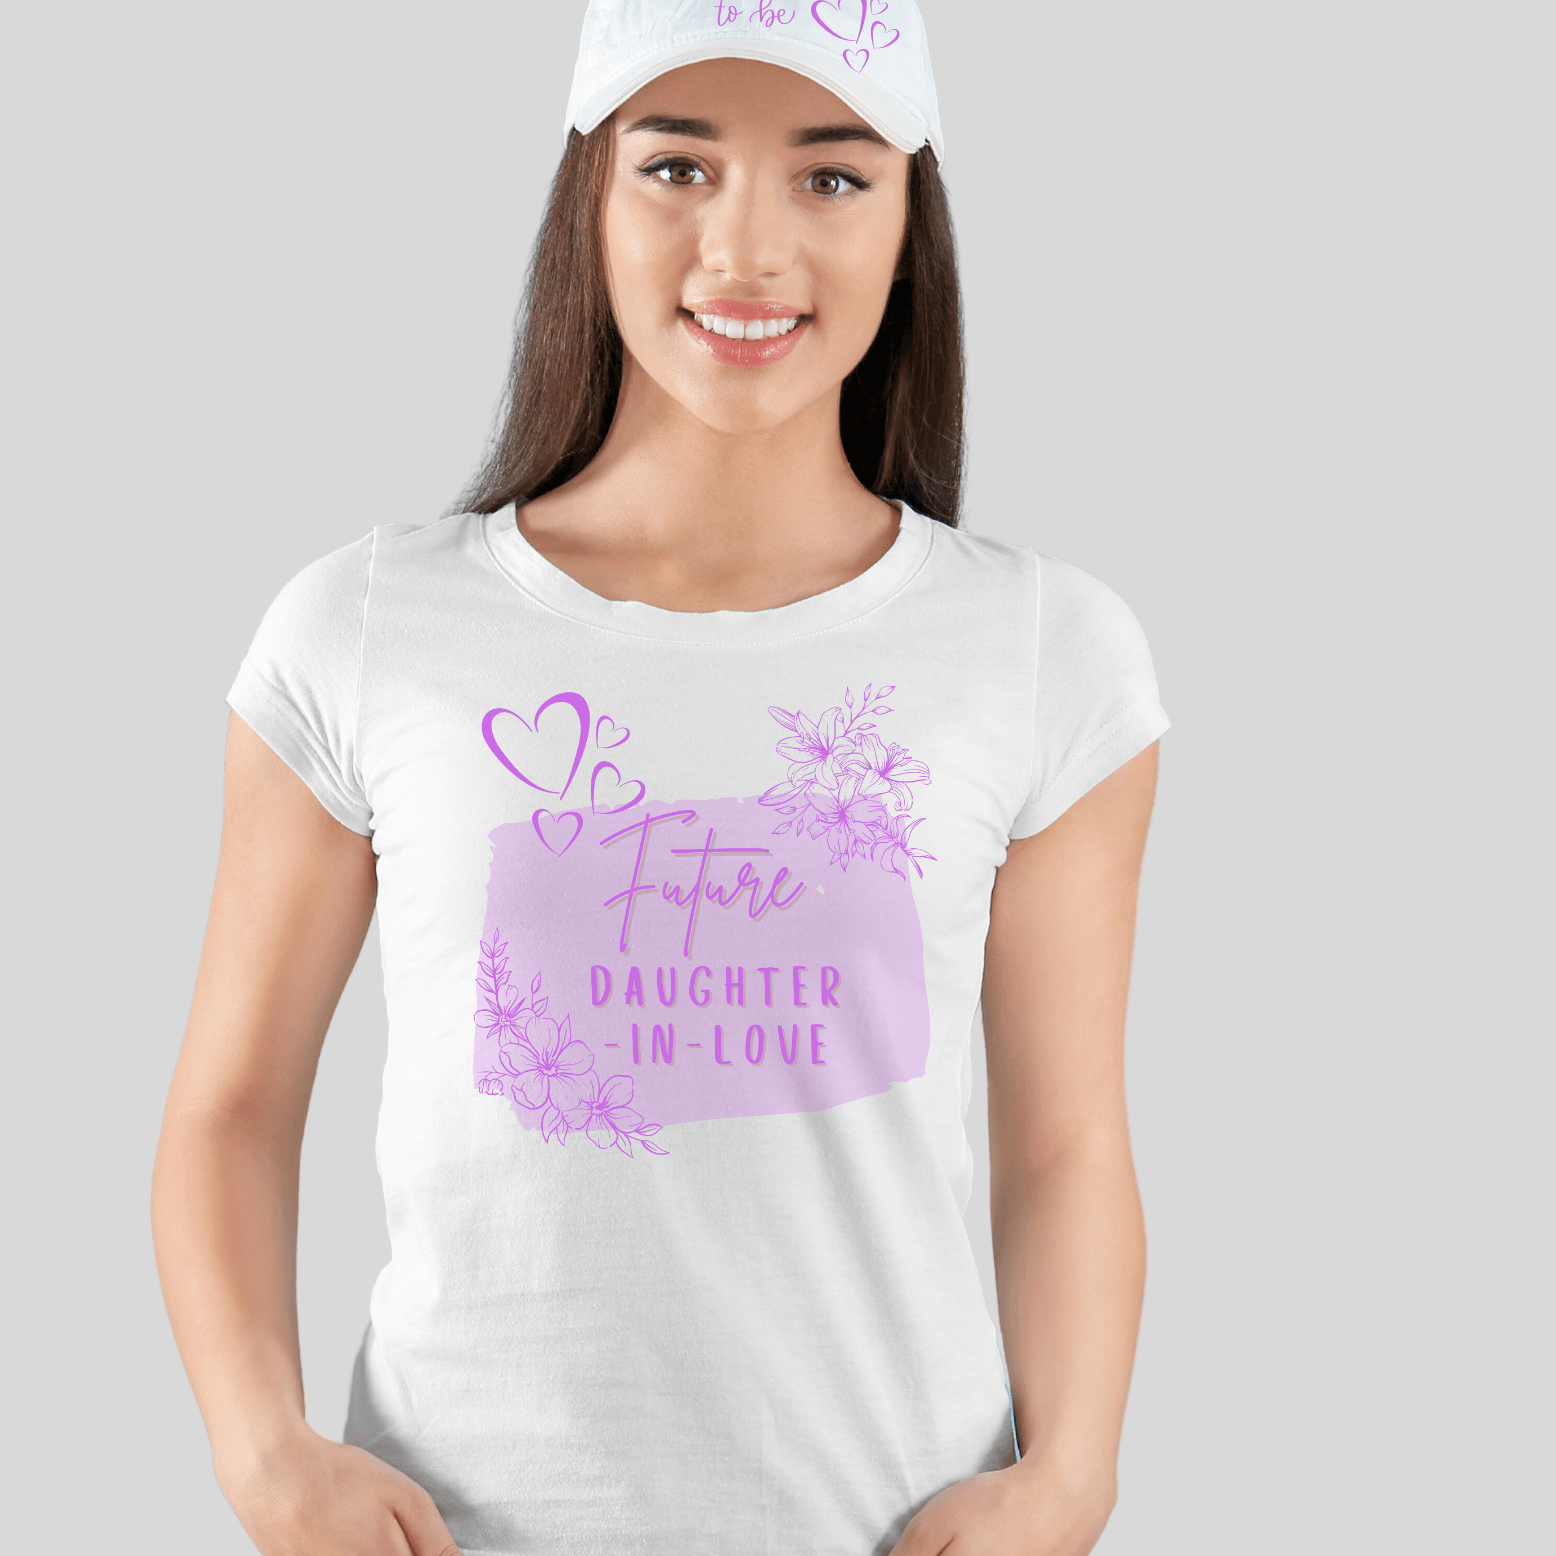 Women's Shirts Future Daughter-In-Love T-Shirt Bridal Shower Gift Softstyle Tee